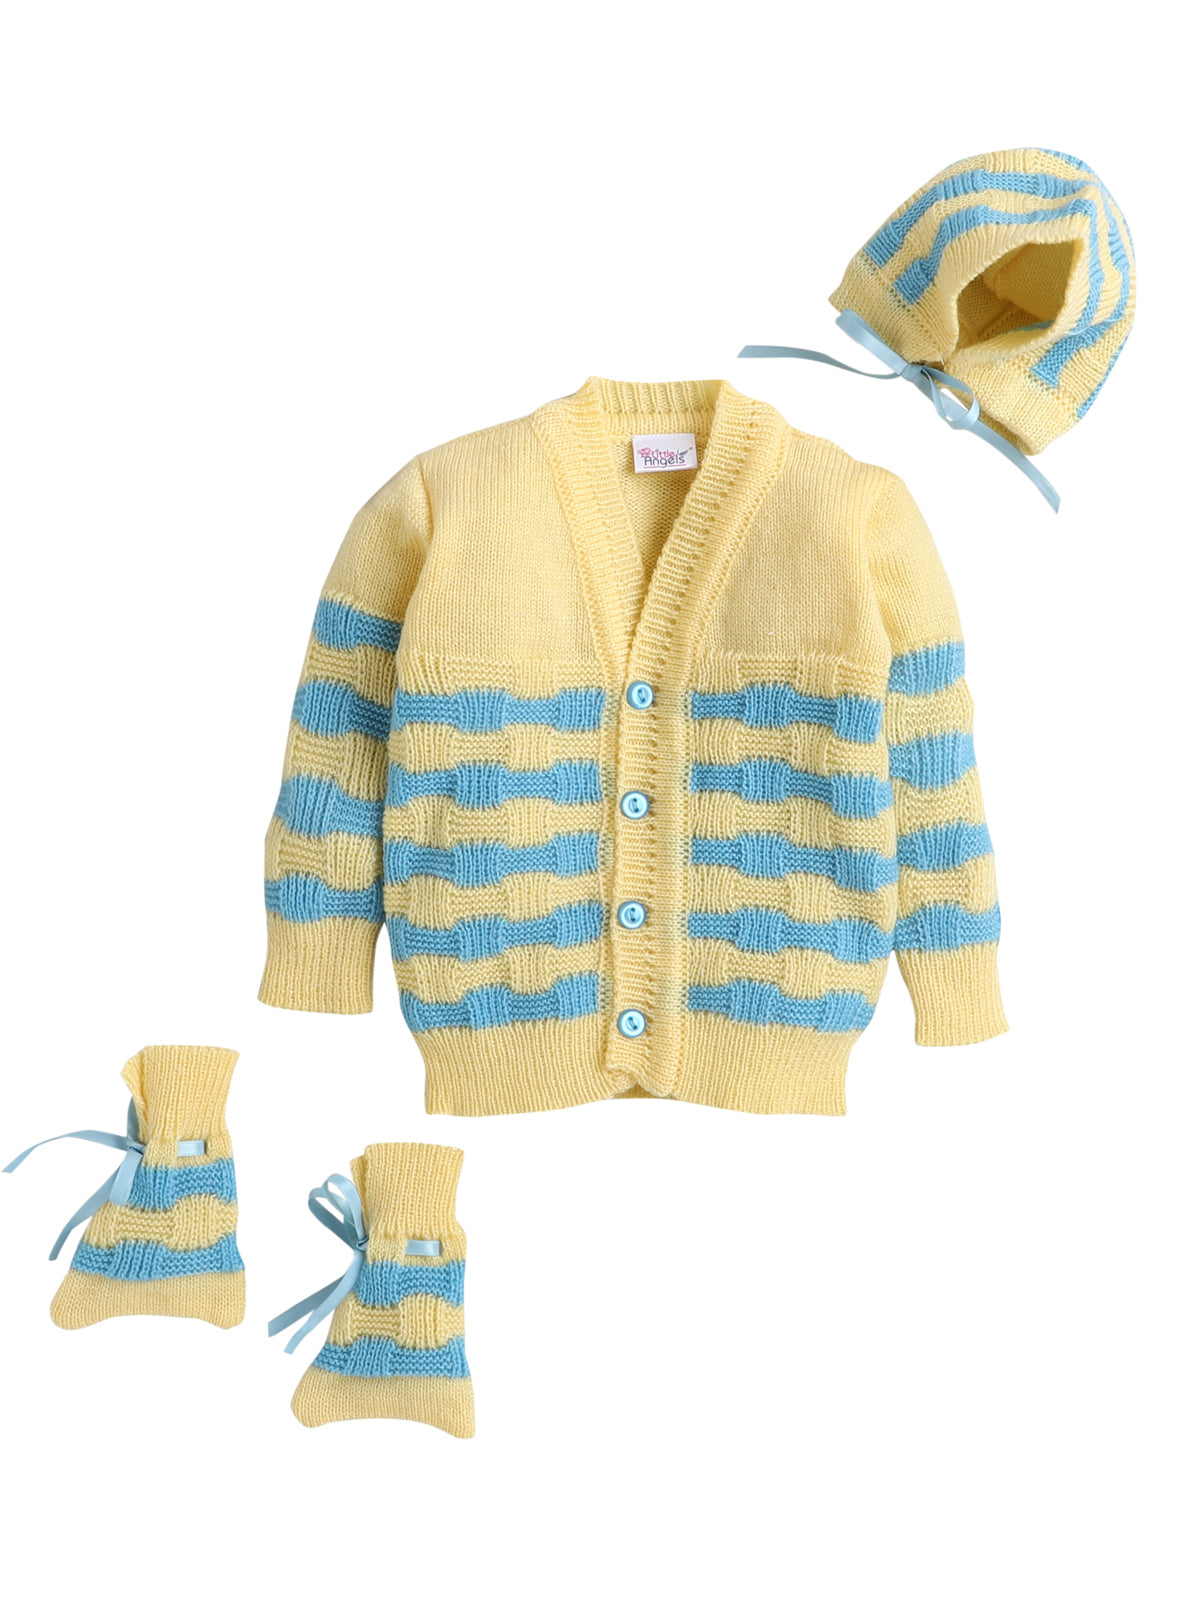 Full sleeves front open yellow with blue stripe  color sweater with matching cap and socks for baby